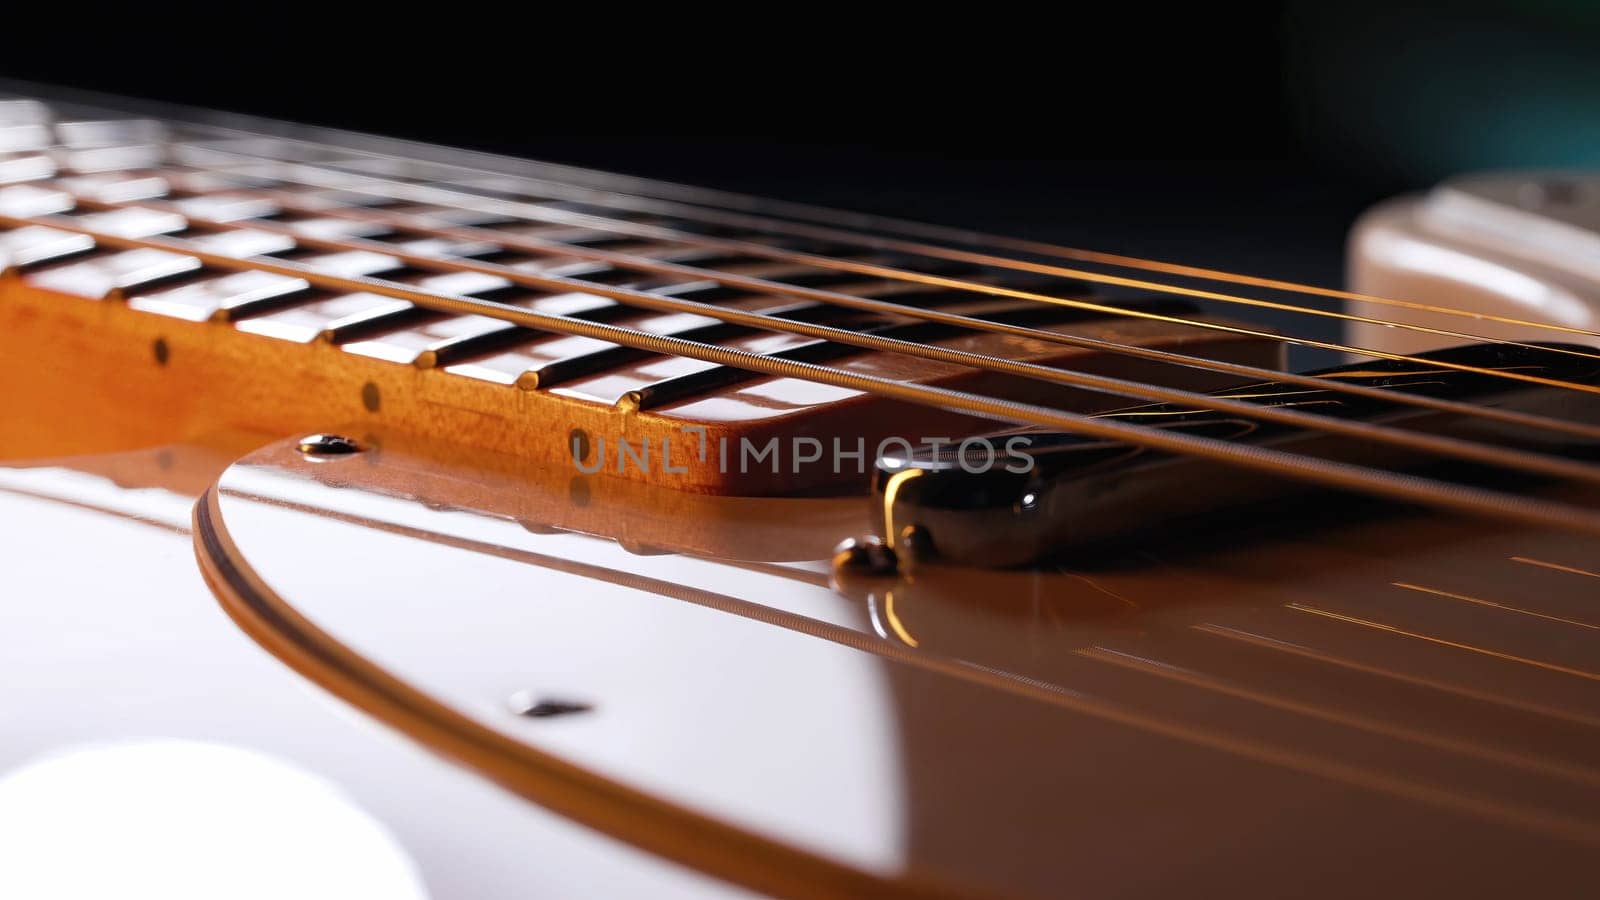 Macro of strings on electric guitar fretboard. Details of instrument close-up. Music, sound, art background. High quality